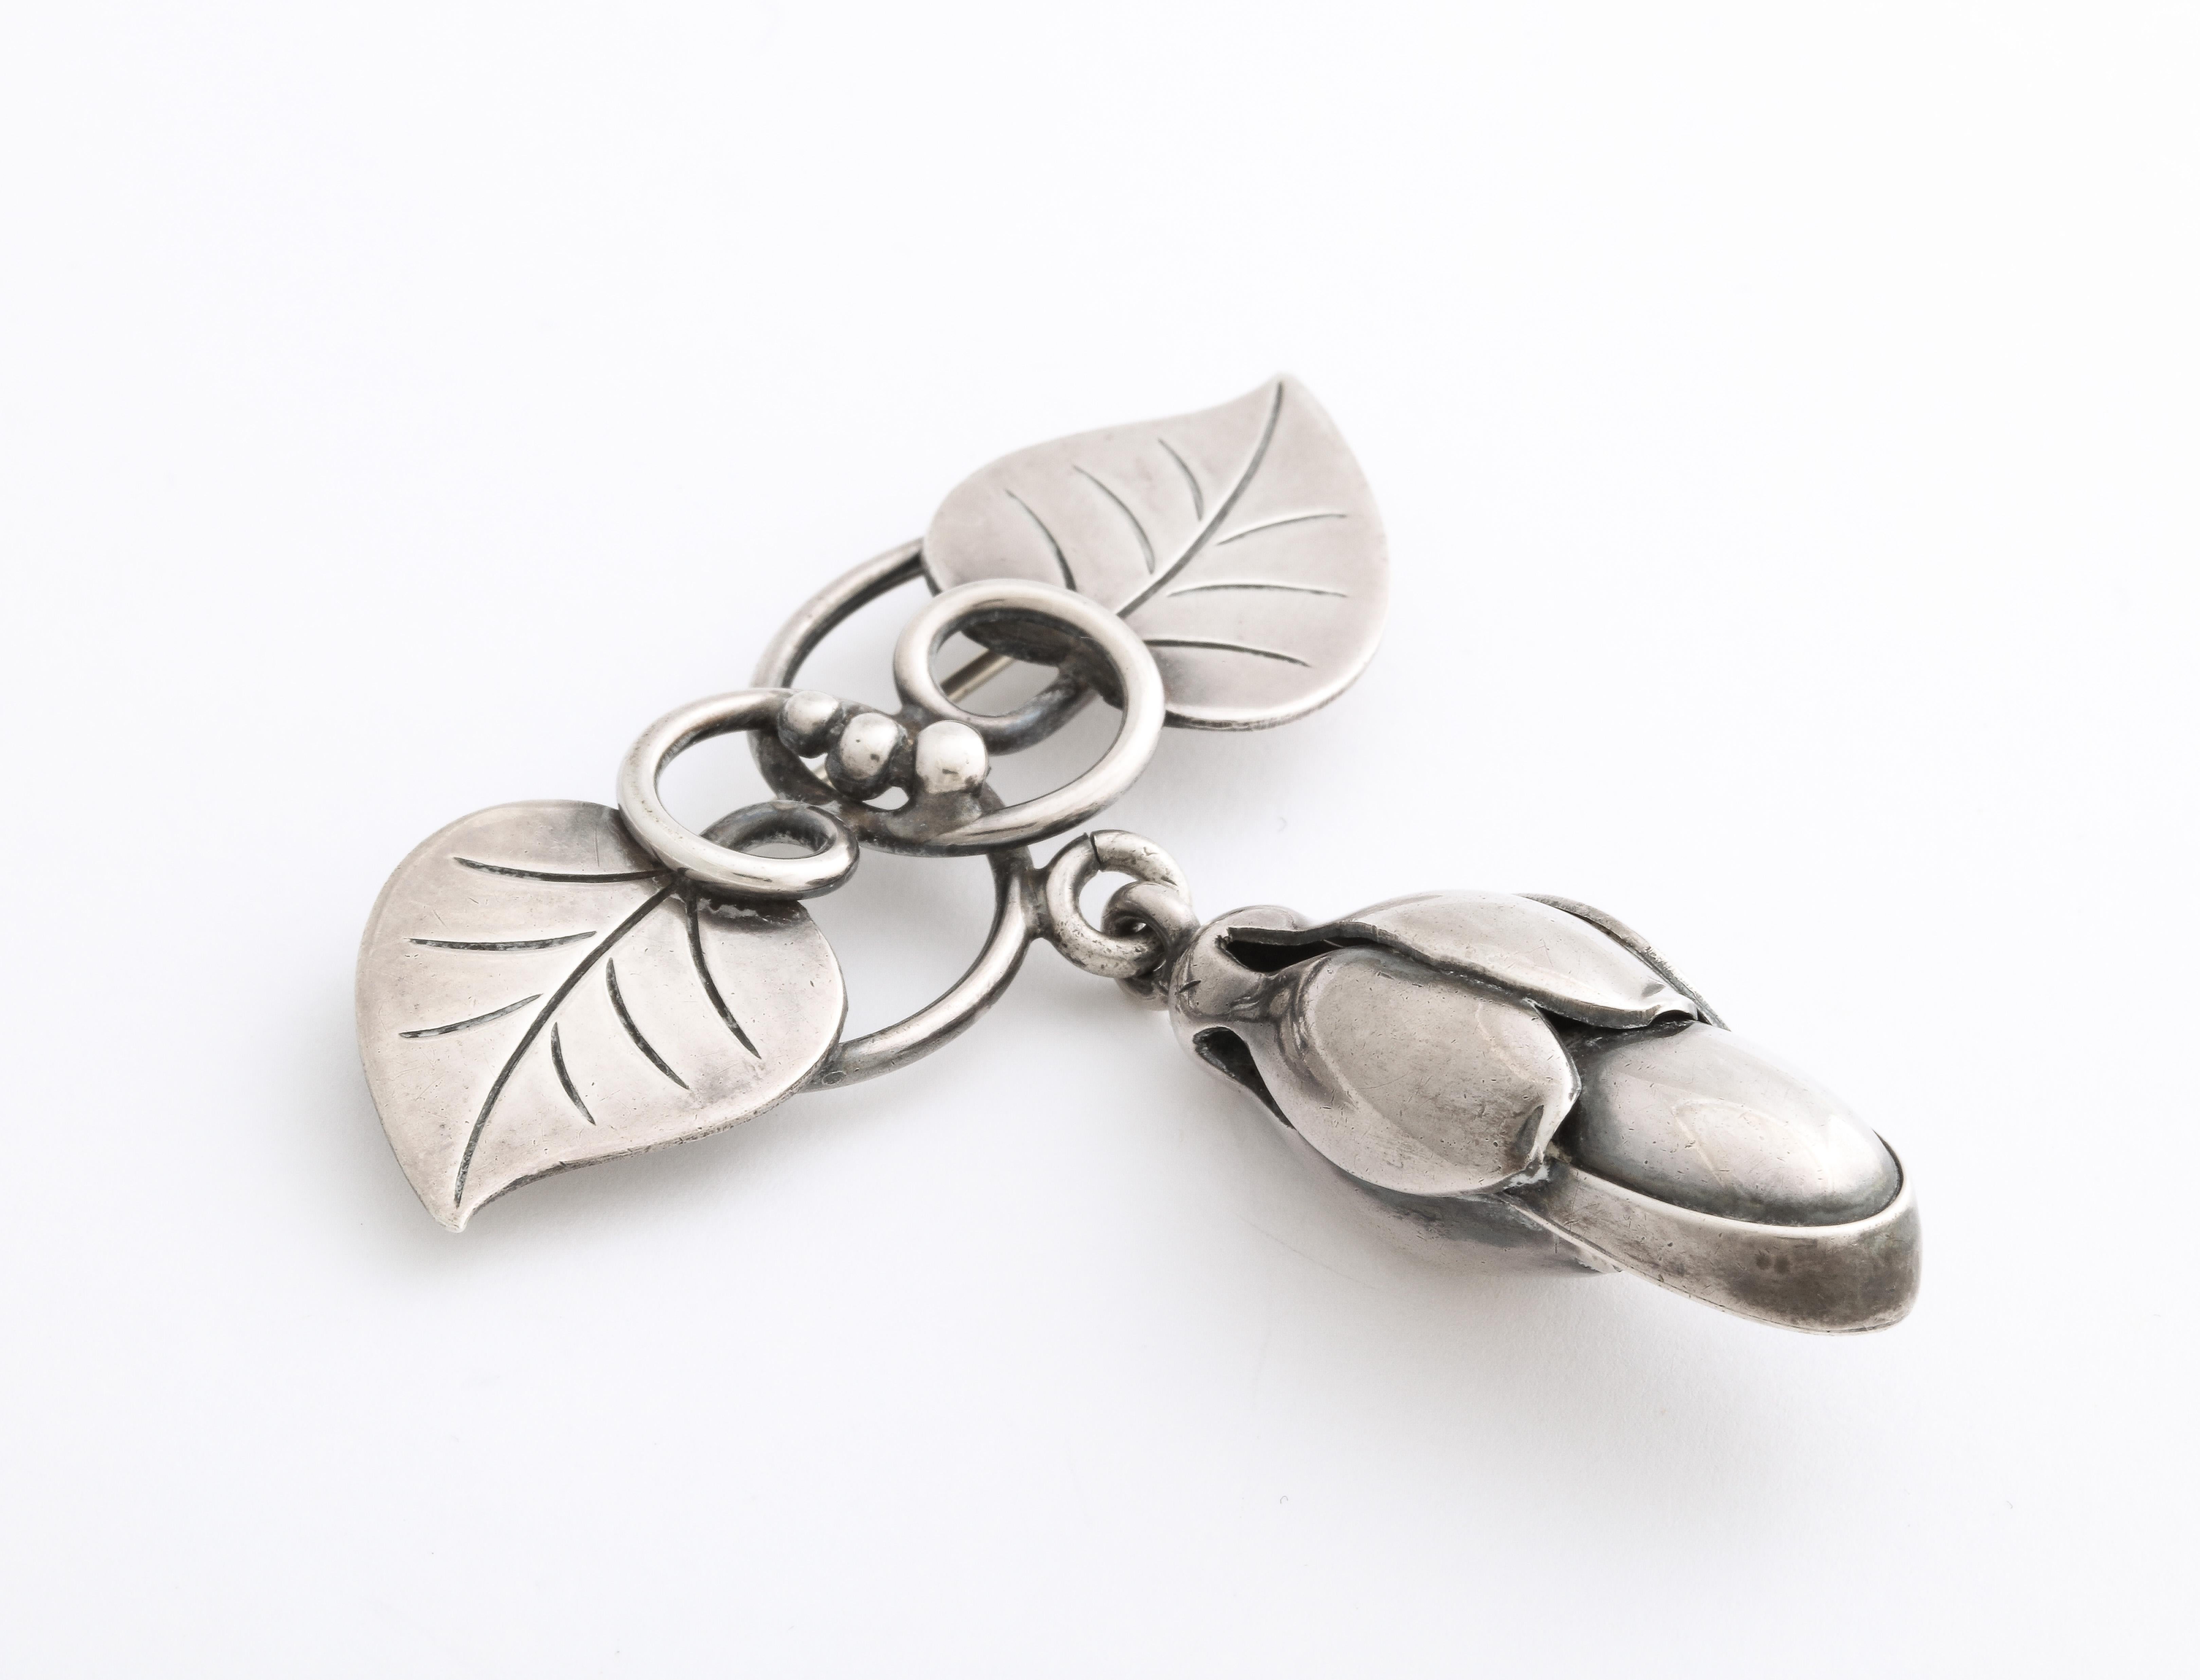 A realistic La Paglia silver floral bud suspends from a vine and two leaves. We love the movable nature of this brooch, the swirls and silver beading. The brooch is refined and elegant and appears to be Danish but is American Modernist in style made